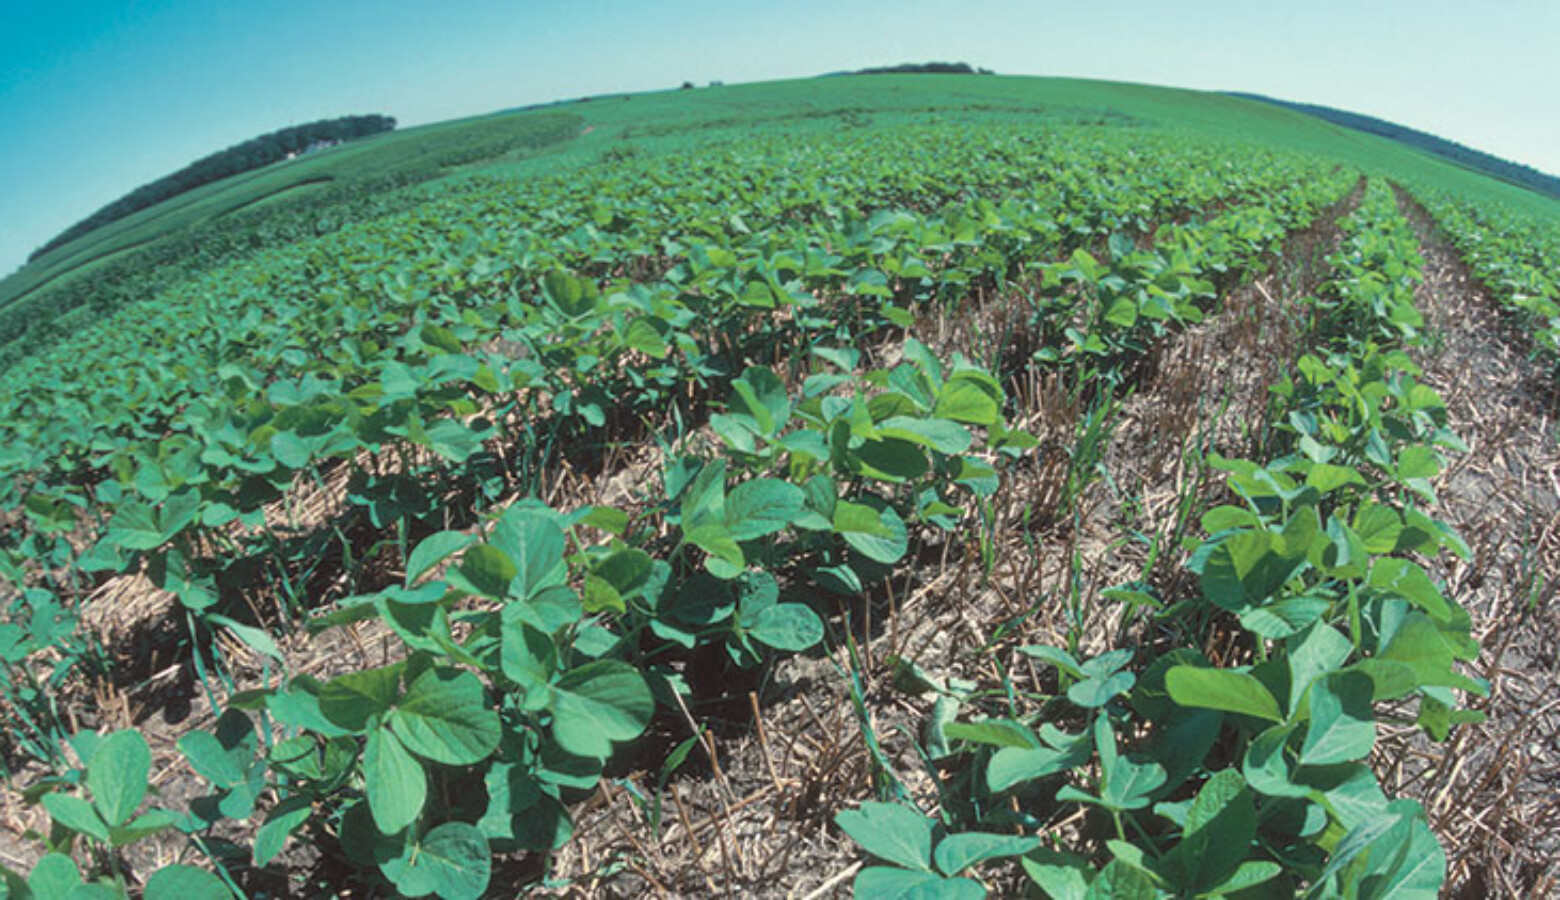 Soybean plants on a field with no-till agriculture. No-till farming can help sequester carbon emissions that contribute to climate change.(Tim McCabe/USDA Natural Resources Conservation Service)